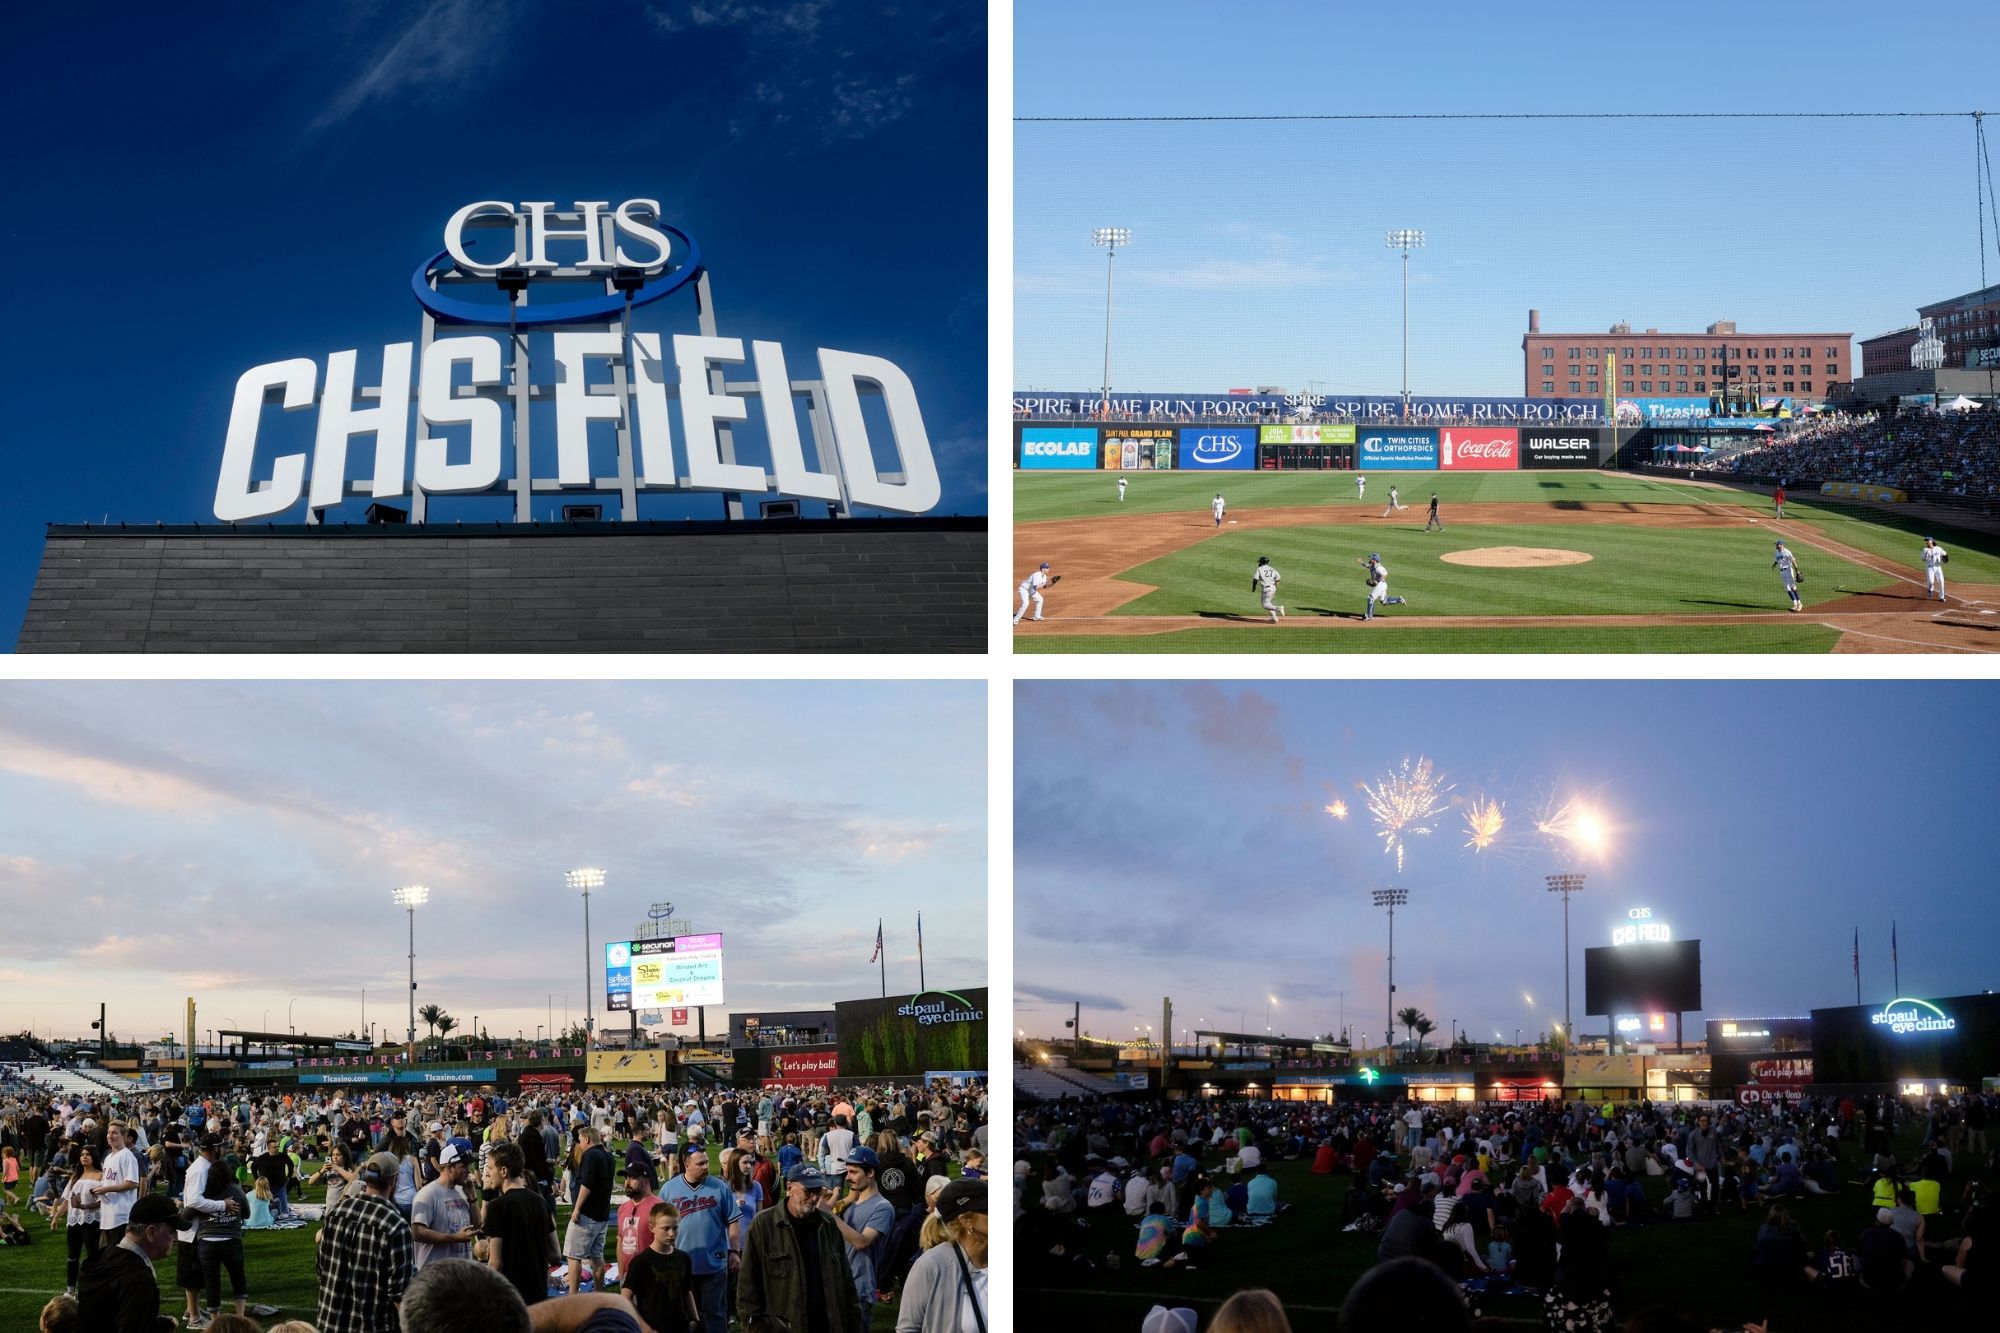 collage: CHS field sign, baseball game in progress, and people sitting on the field eating and watching fireworks